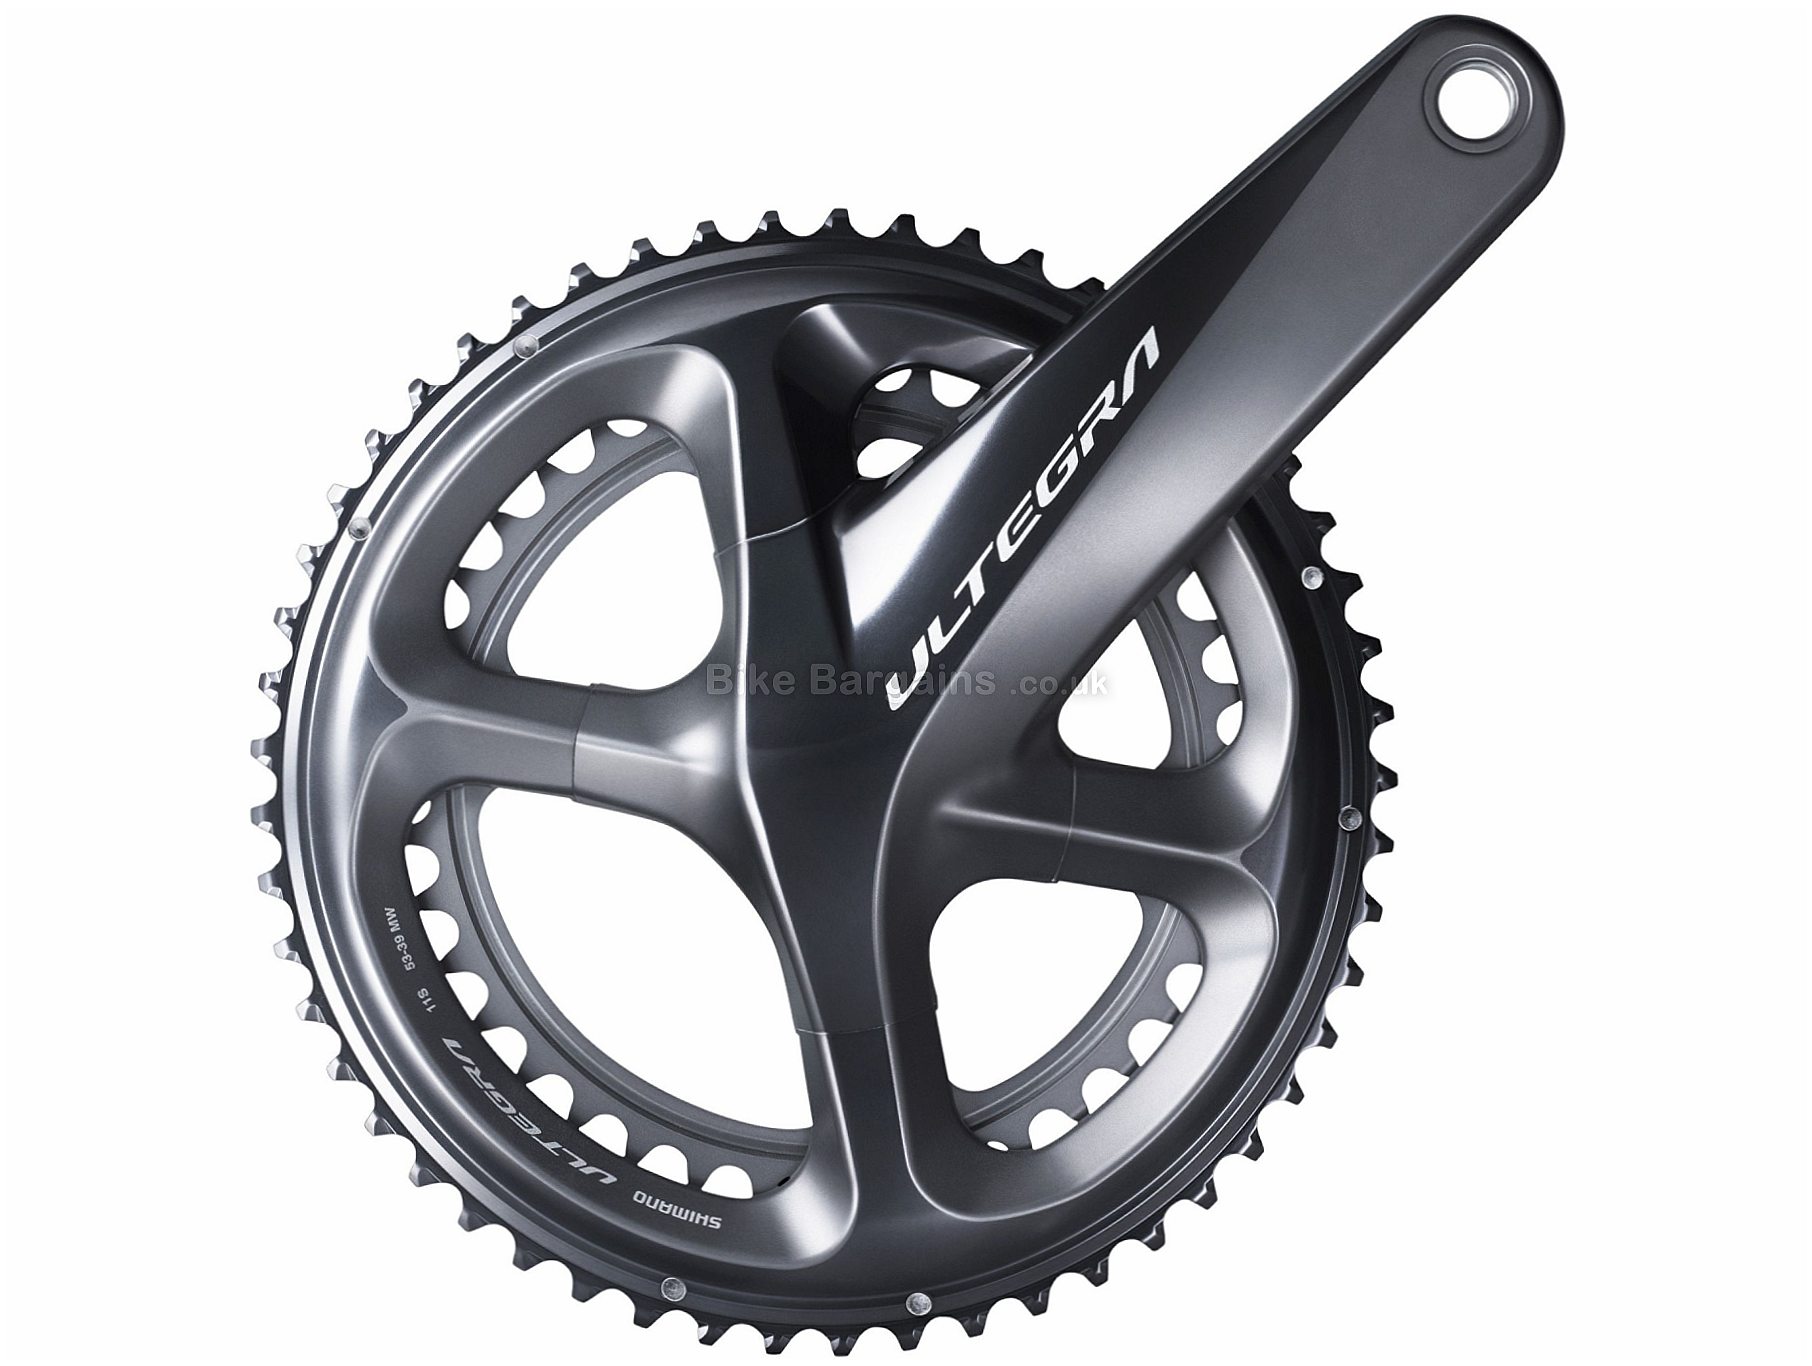 shimano r8000 chainset